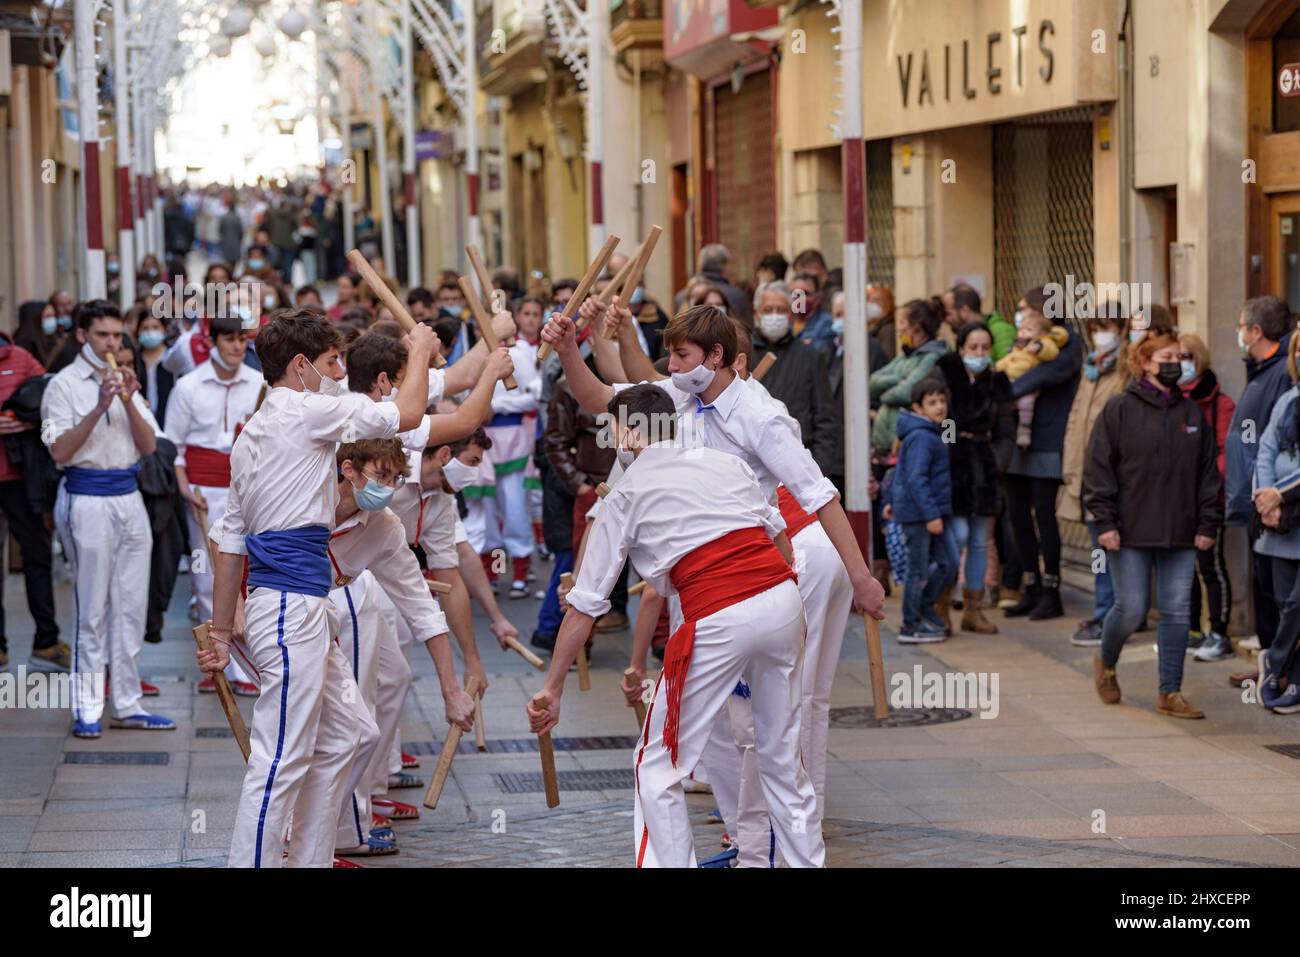 Ball de bastons (stick dance) of Montblanc at the 2022 Valls Decennial Festival, in honor of the Virgin of the Candlemas in Valls (Tarragona, Spain) Stock Photo